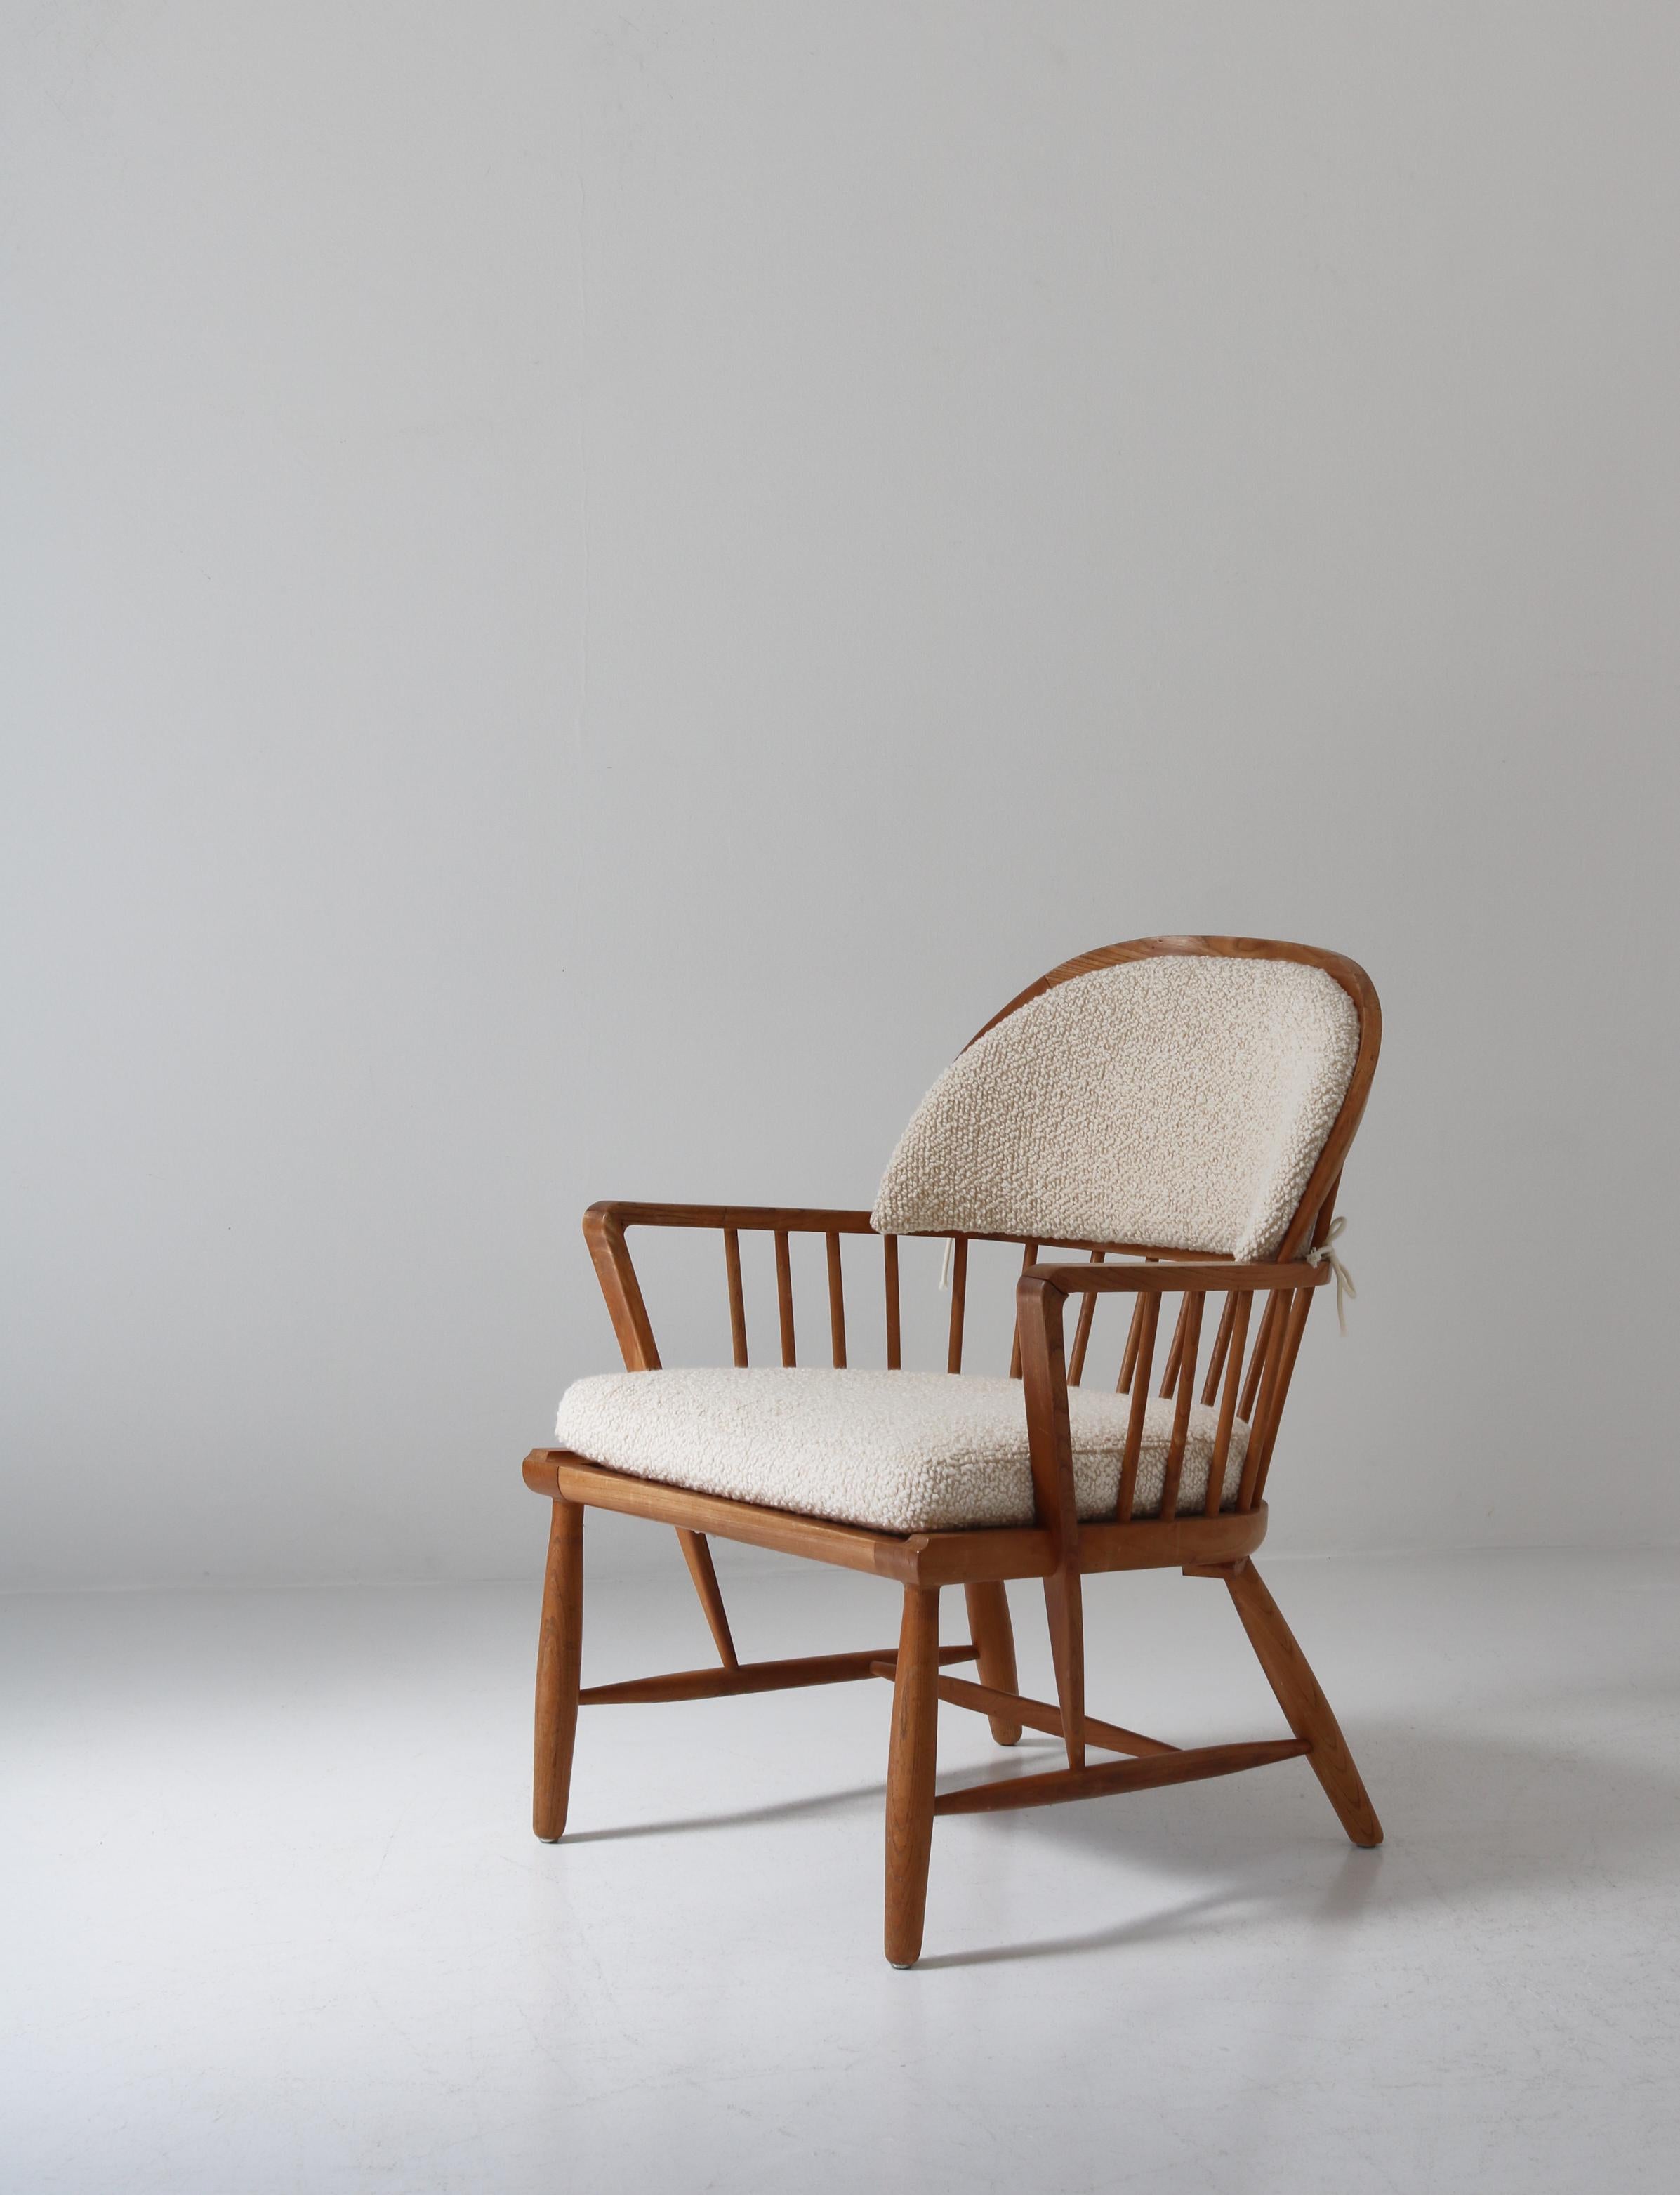 Scandinavian Modern Windsor Chair in Patinated Ash and White Bouclé, 1940s For Sale 2